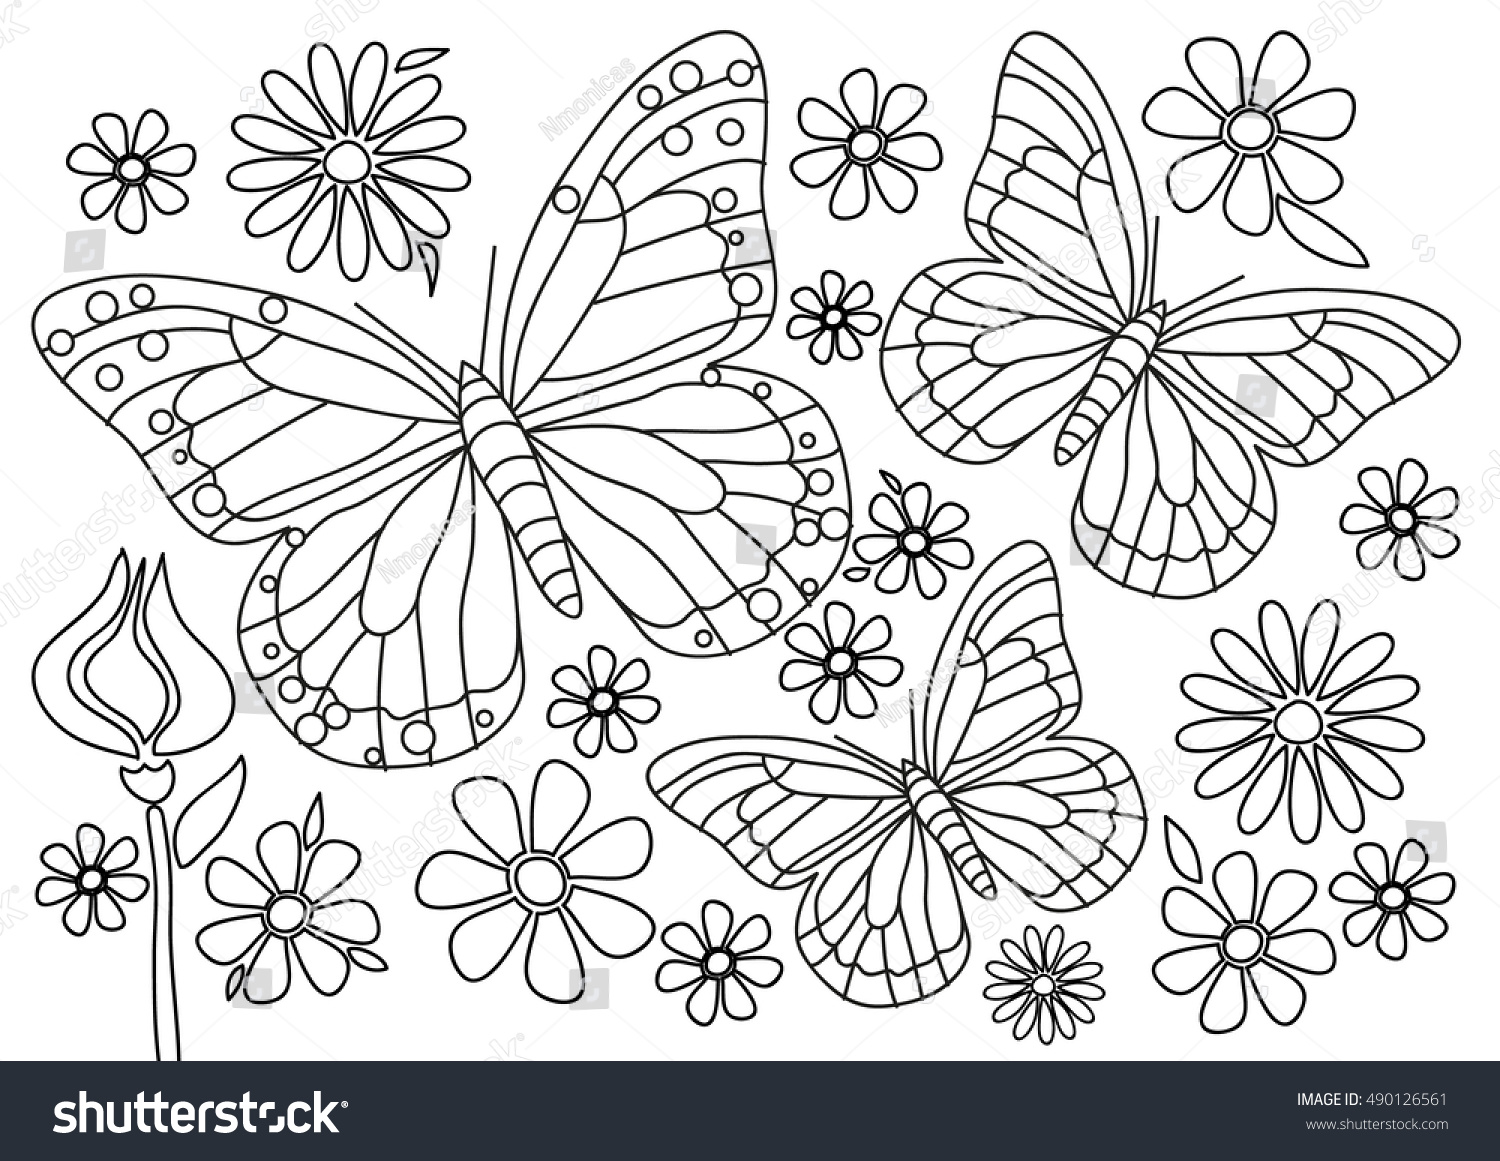 Coloring page   Butterflies with flowers   Royalty Free Stock ...